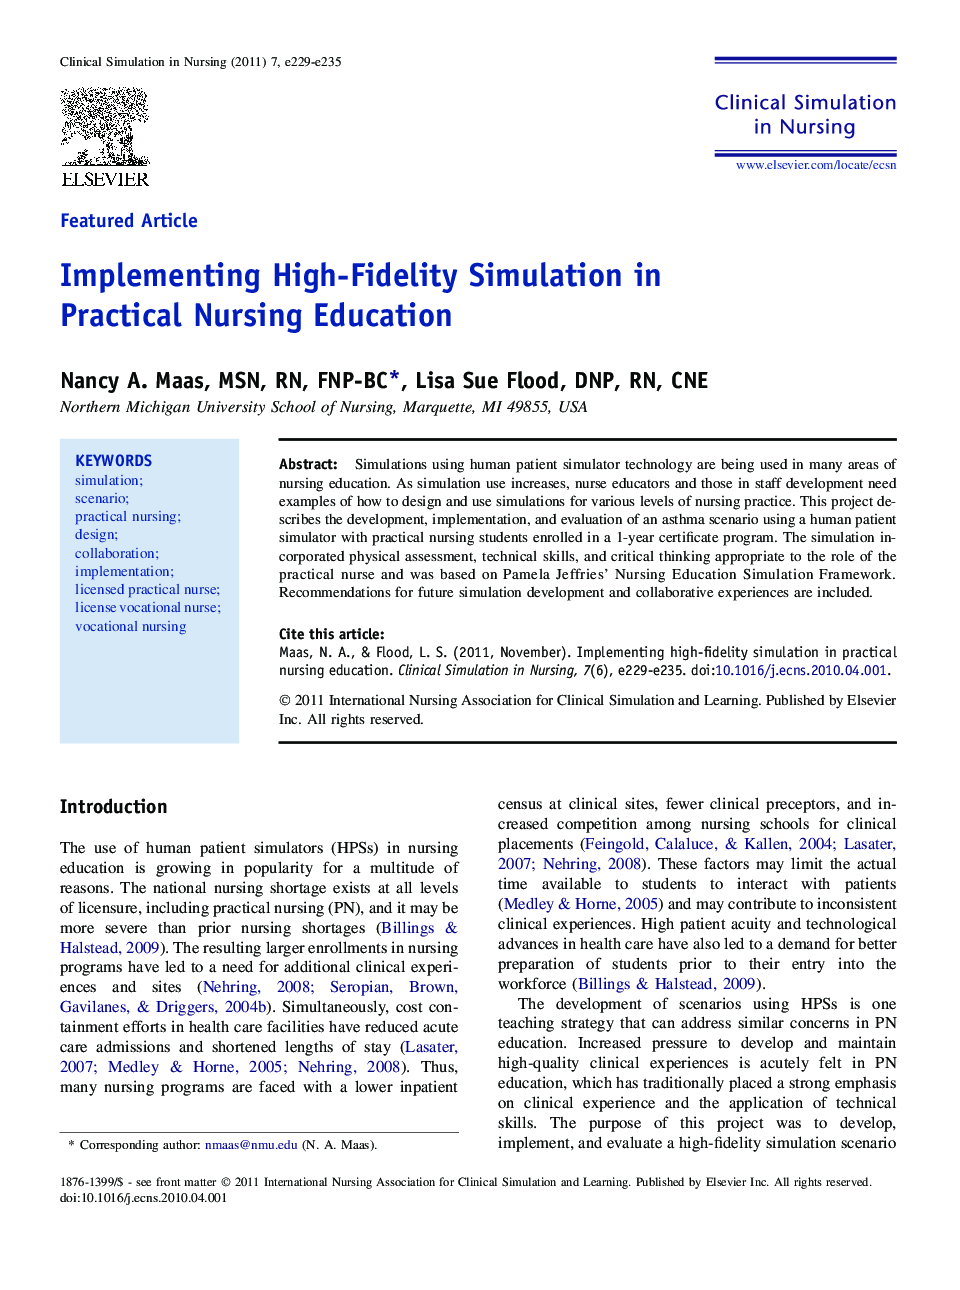 Implementing High-Fidelity Simulation in Practical Nursing Education